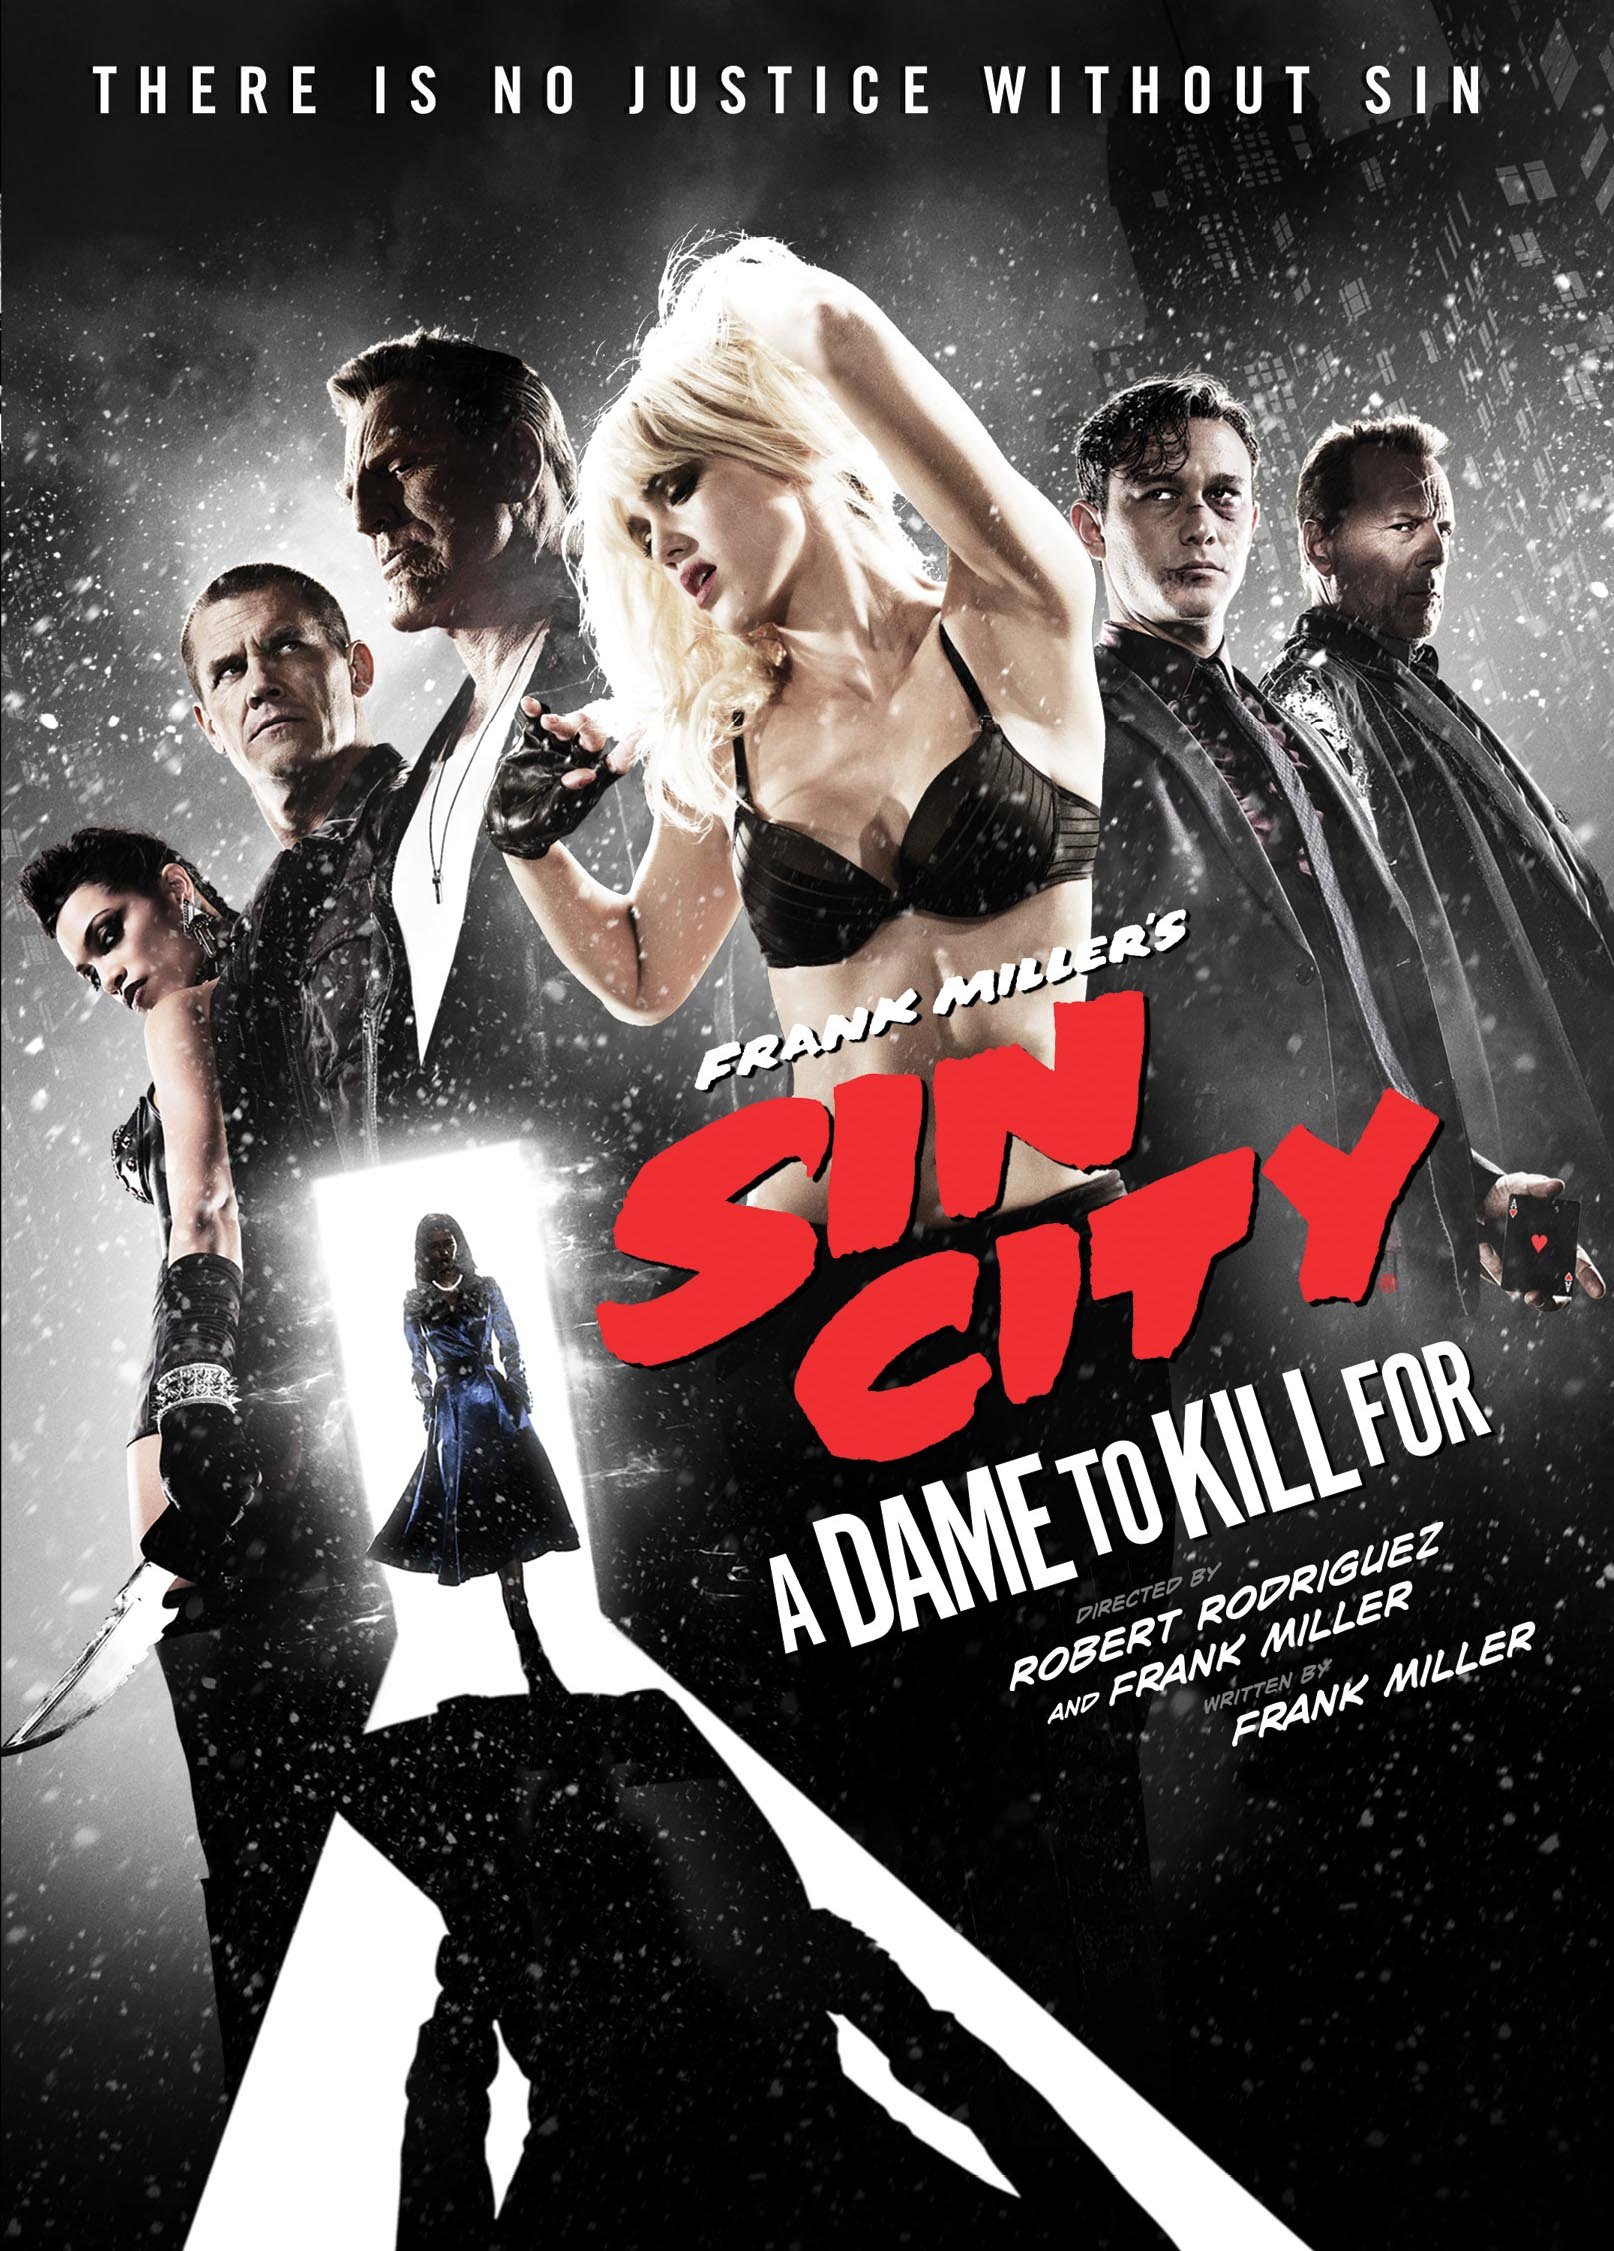 Eva green sin city a dame to kill for